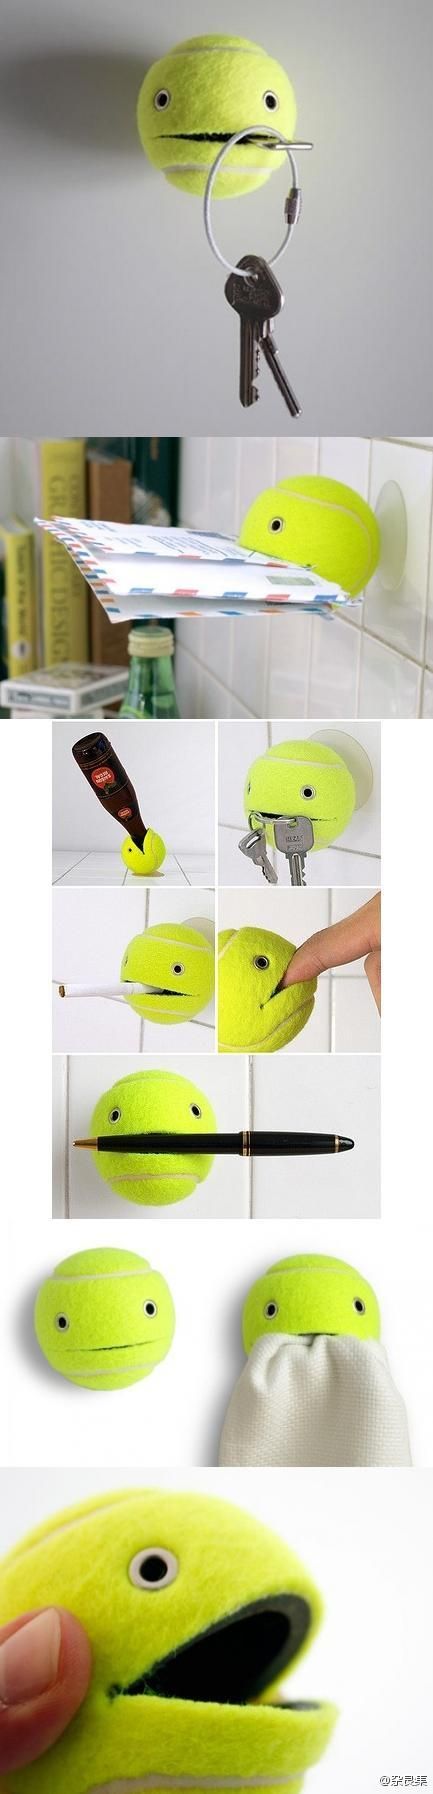 i have plenty of tennis balls to try this with